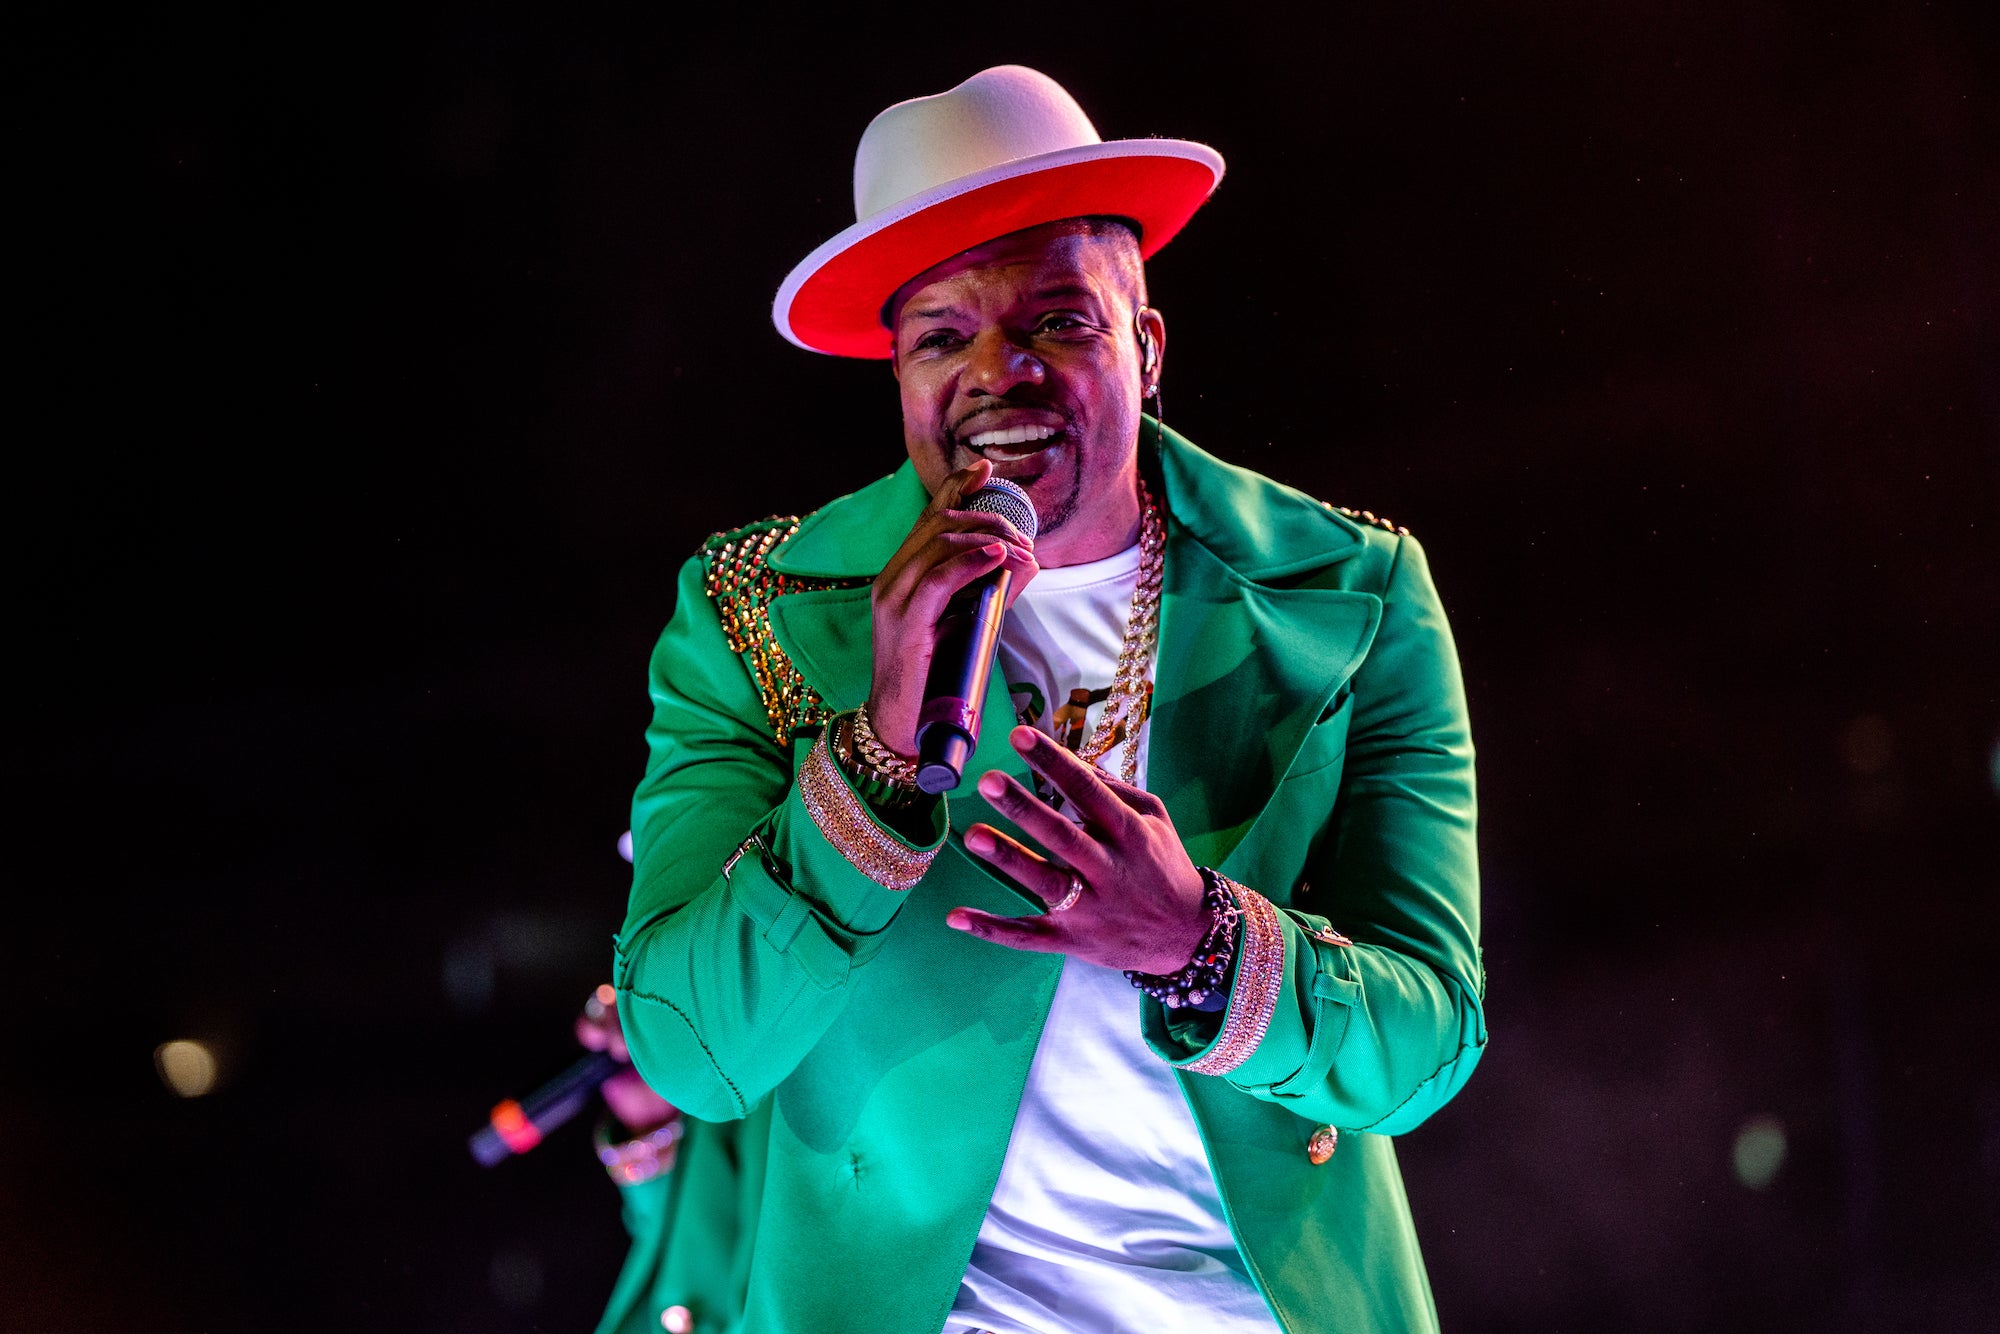 Ricky Bell Gets Down To ‘Cool It Now’ While Grocery Shopping